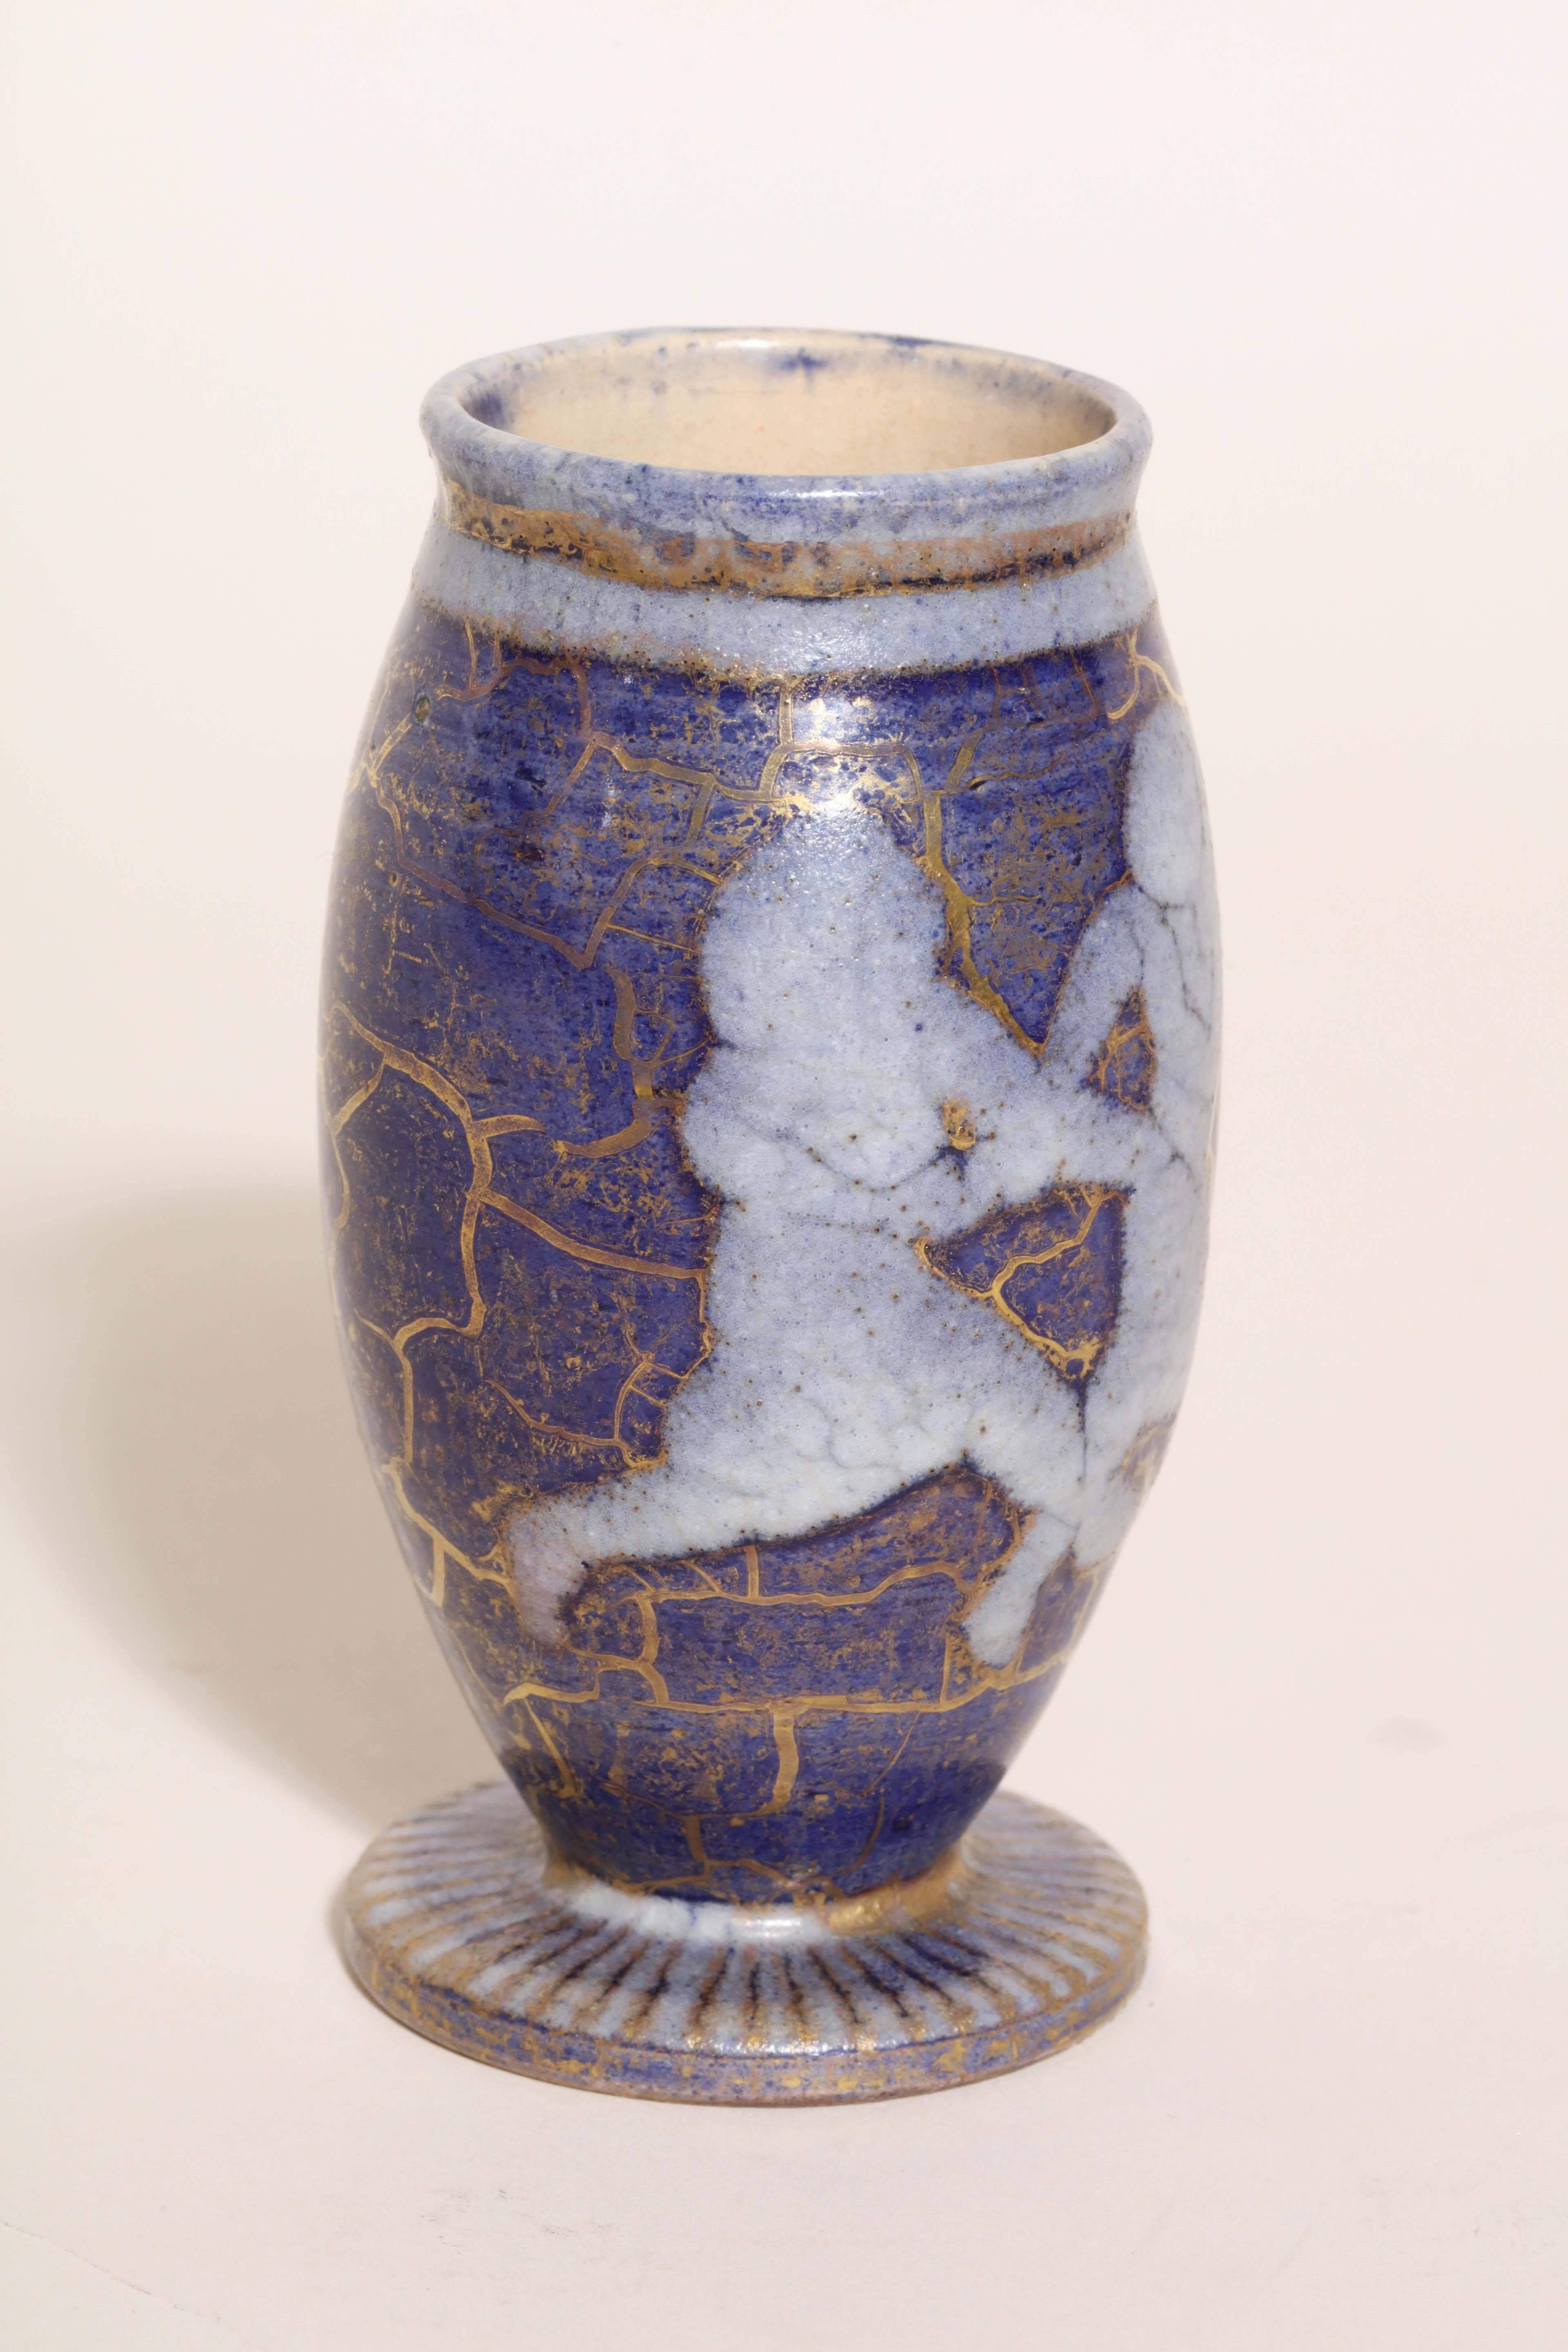 This small vase has two figures in action on a blue and gold ground.

Jean Mayodon was trained as a painter, but became a ceramist with a painter's mind. He produced figurative decorated pottery after the antique tradition characterized by the